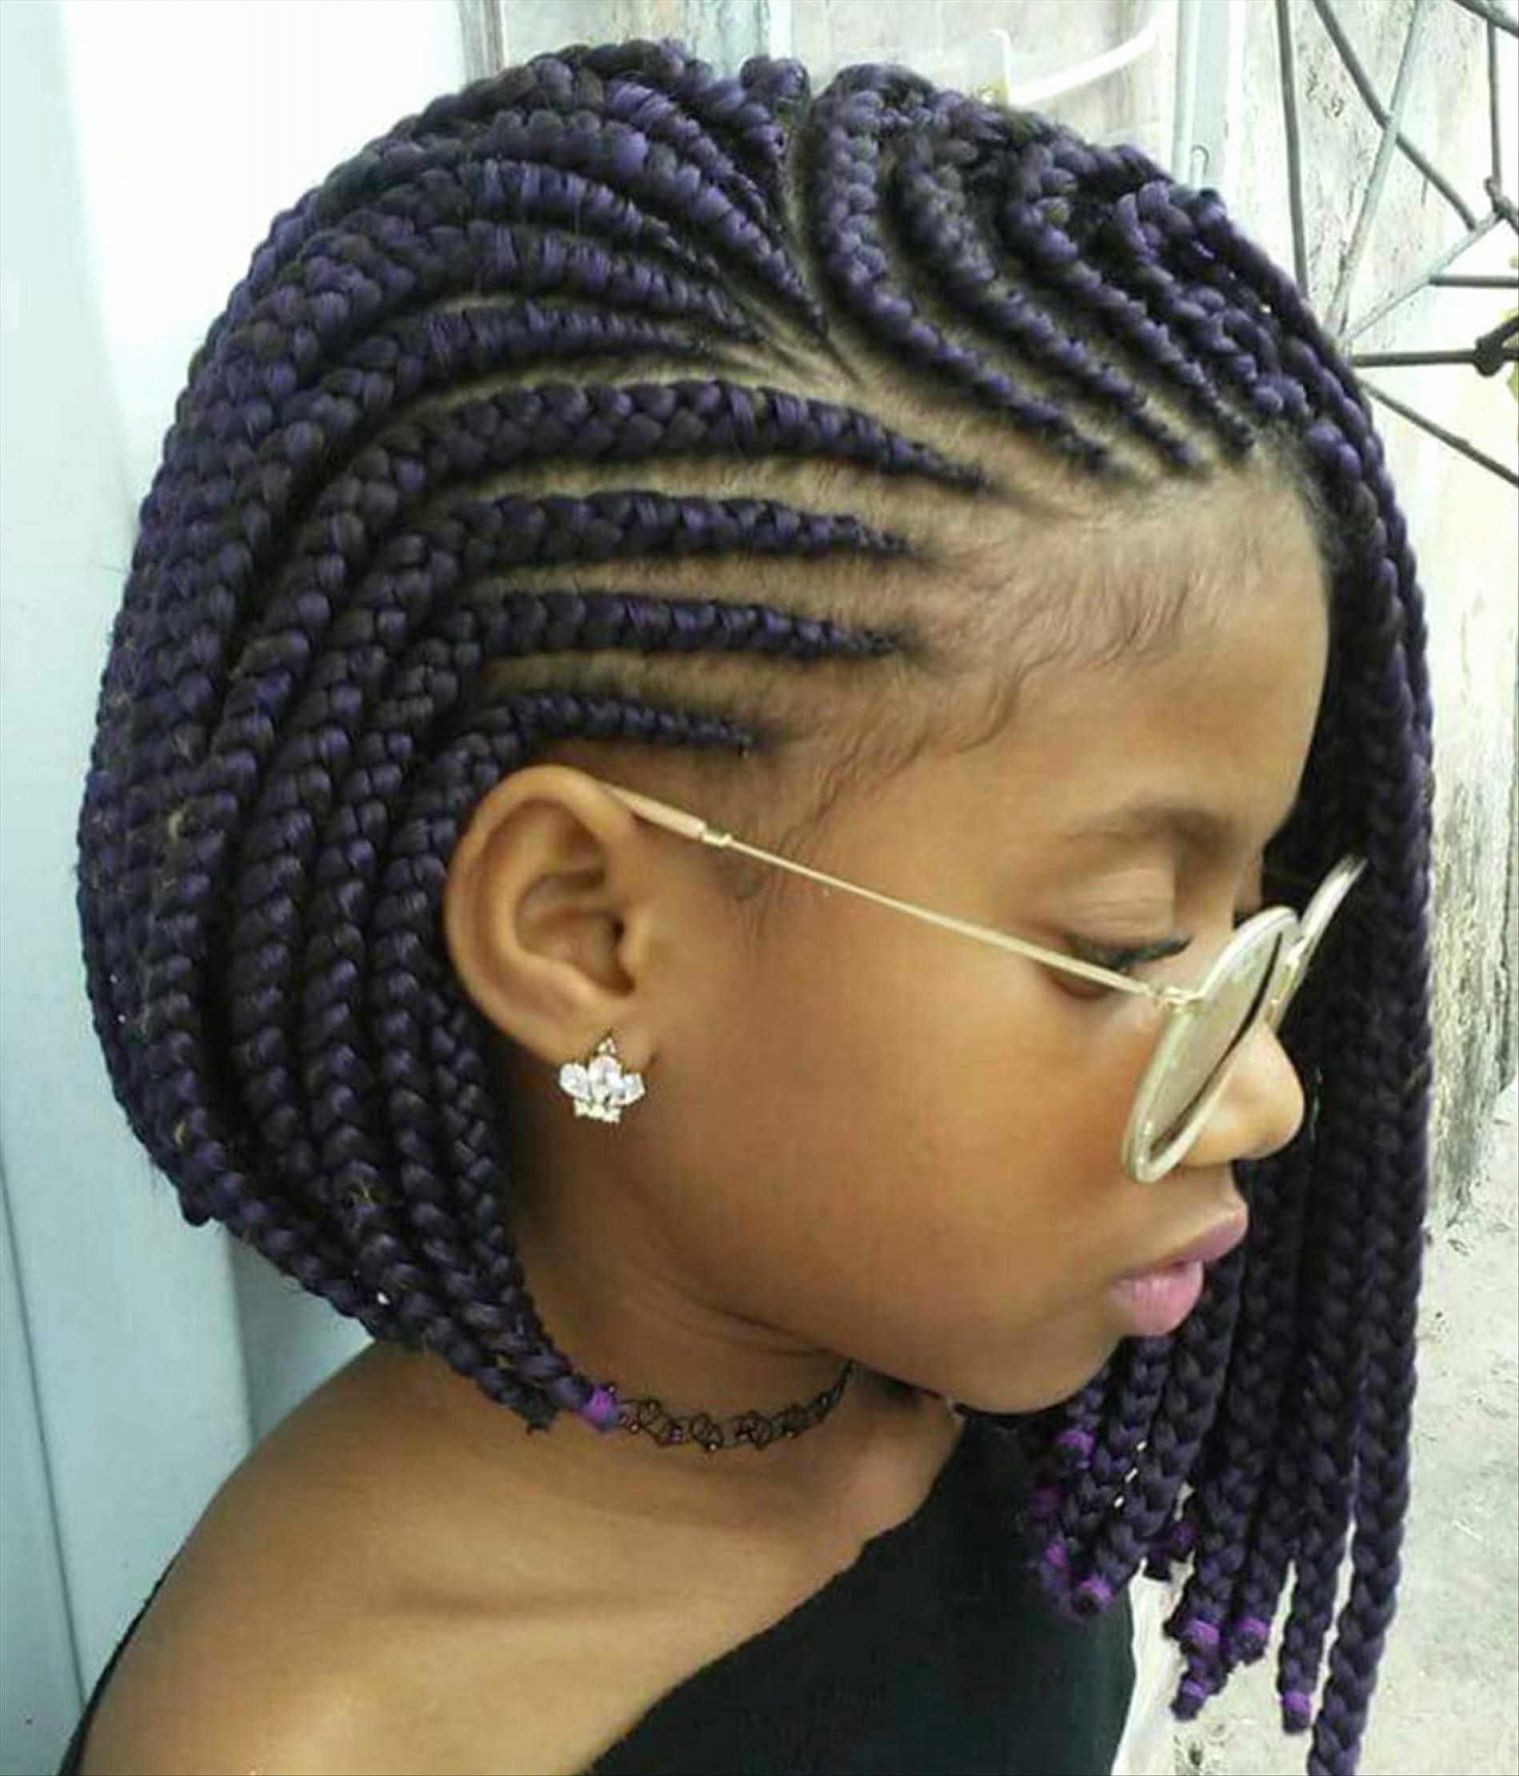 African Kids Hairstyle
 Braided African Hairstyles for Kids